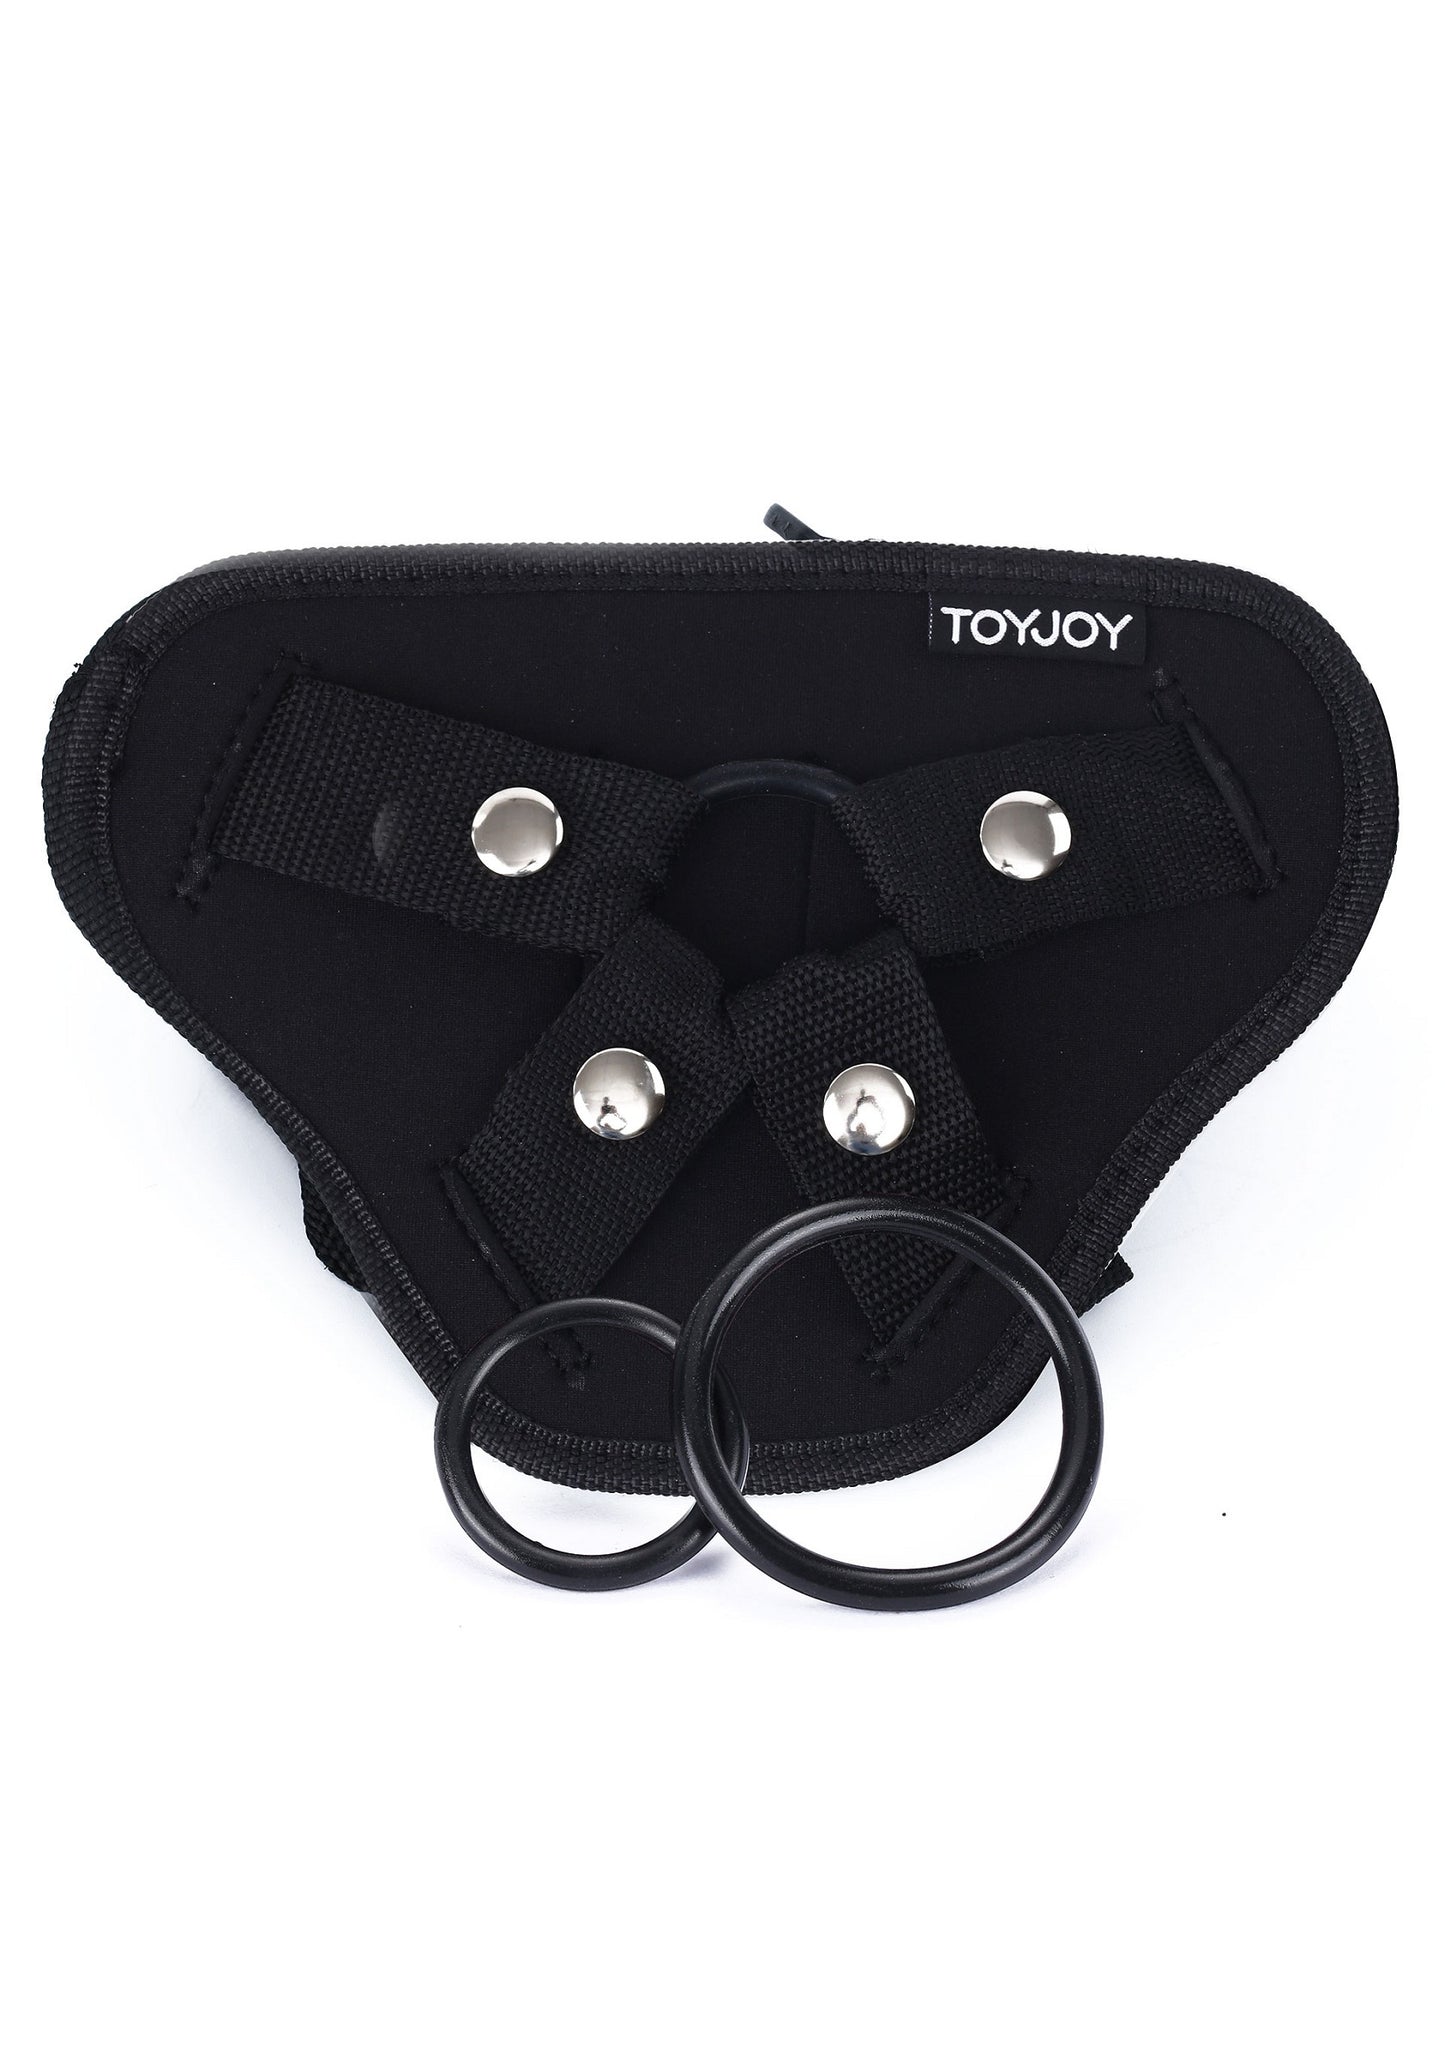 ToyJoy Get Real Strap-On Full Cover Deluxe Harness O/S BLACK - 5